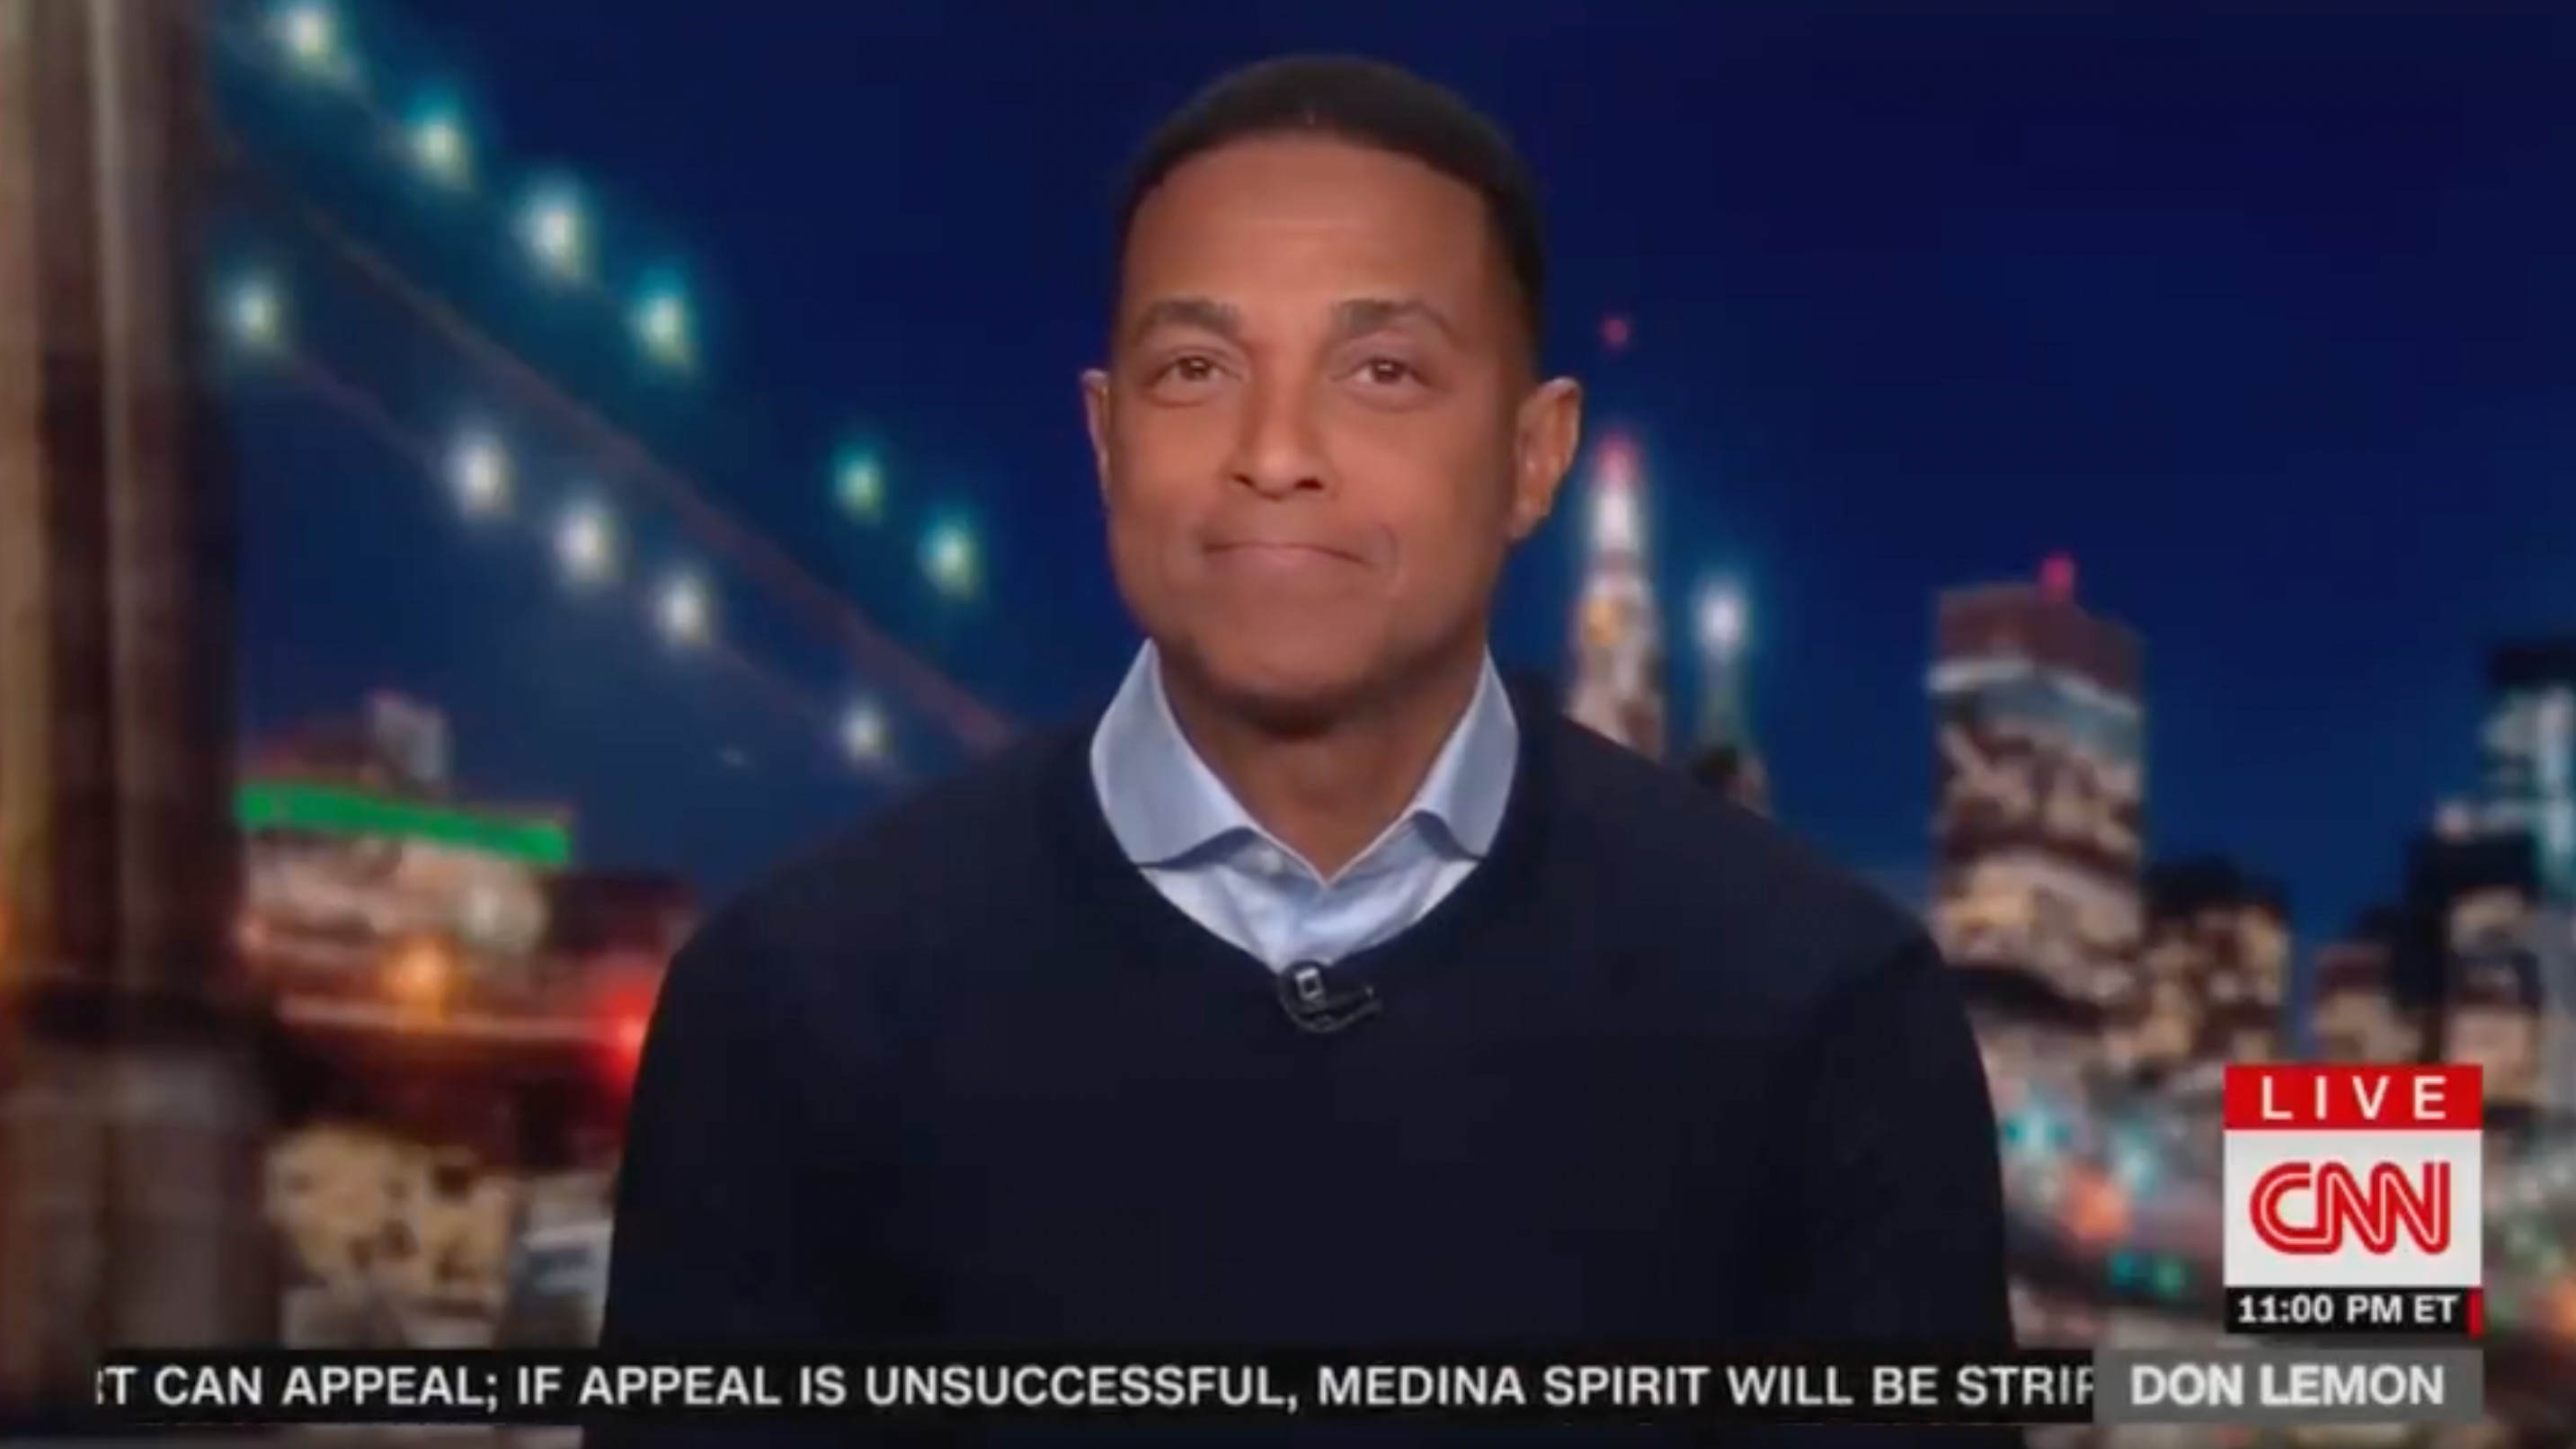 CNNâ€™s Don Lemon has lowest-rated week since struggling program switched names - Fox News